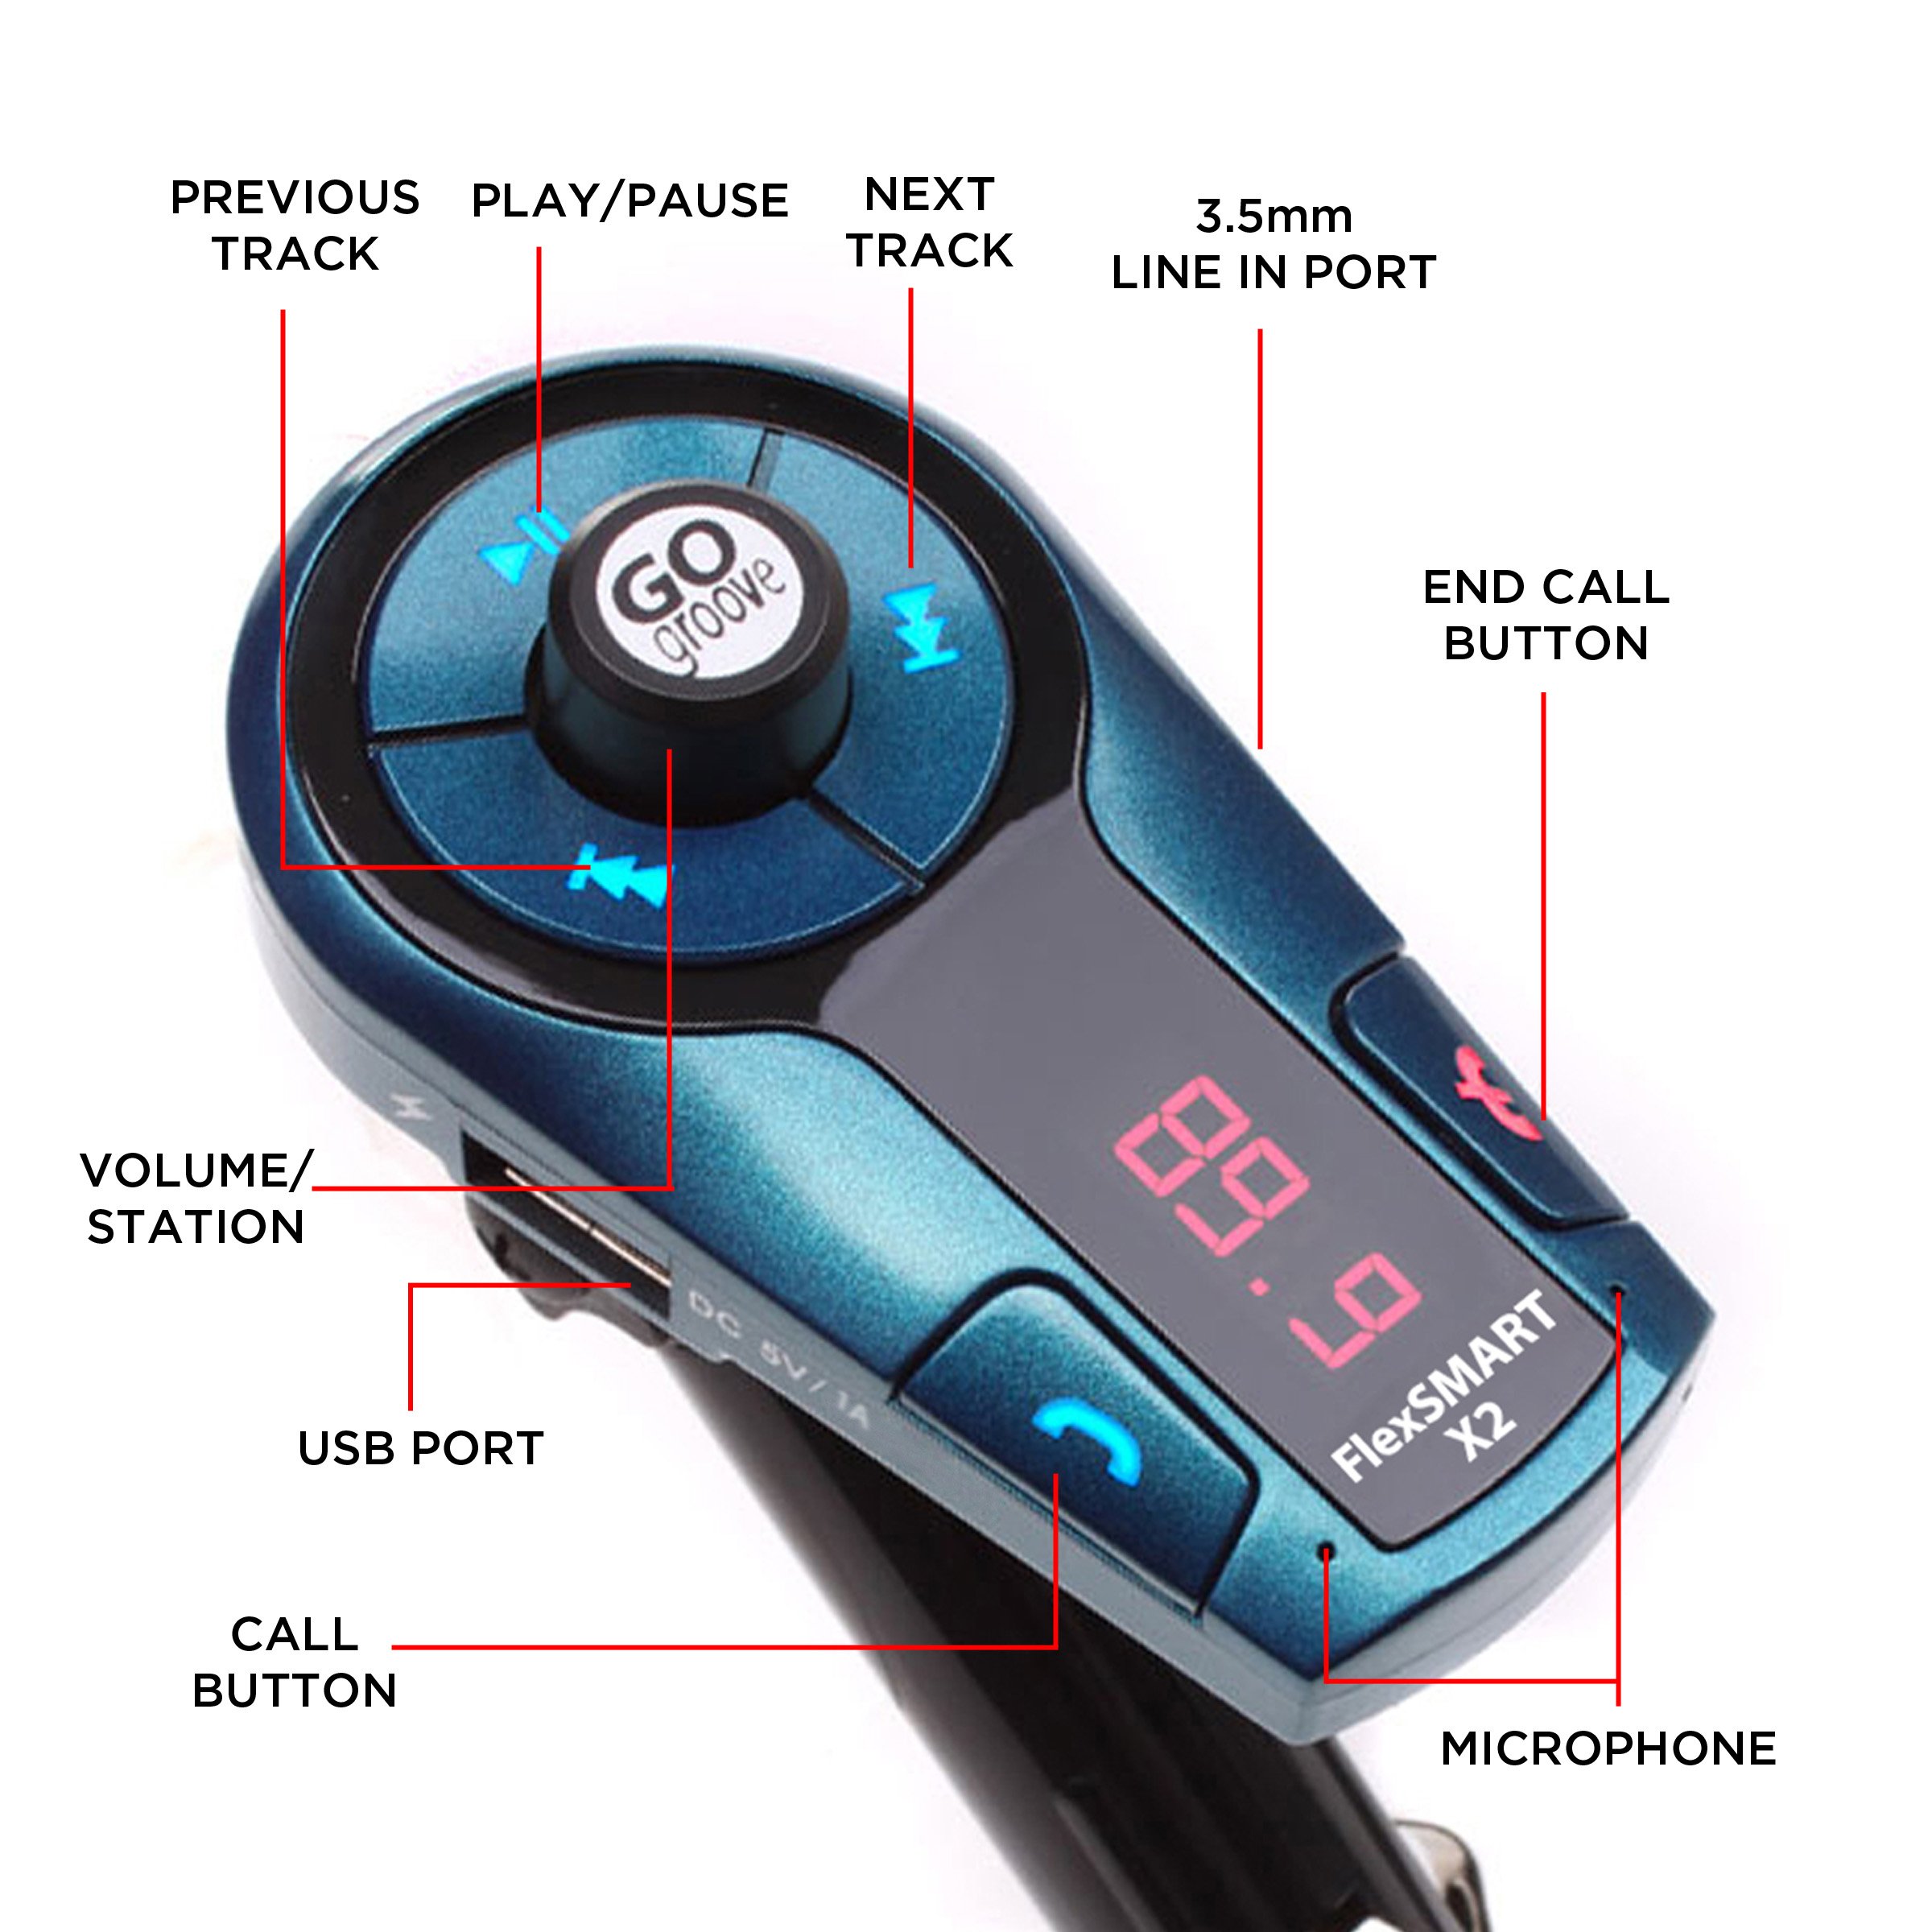 GOgroove FlexSMART X2 Mini Bluetooth FM Transmitter Radio Adapter Car Kit, USB Charging, Hands Free Calling, Music Controls, AUX Input – Compatible with MP3 Players, iPhone, Samsung, and More Devices